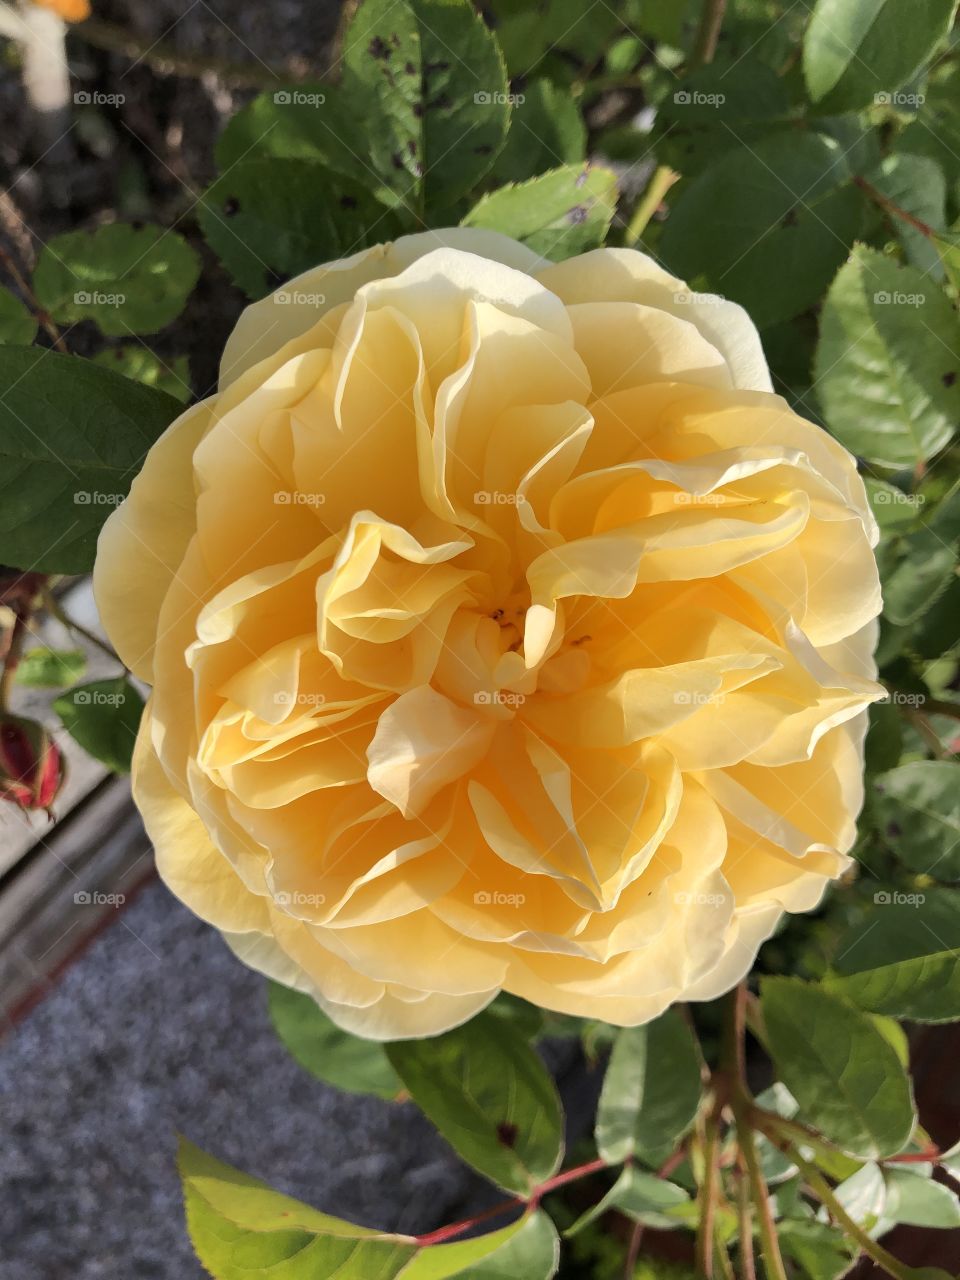 The first roses in our garden in late spring 2020, this one stands very proud posing perfection.